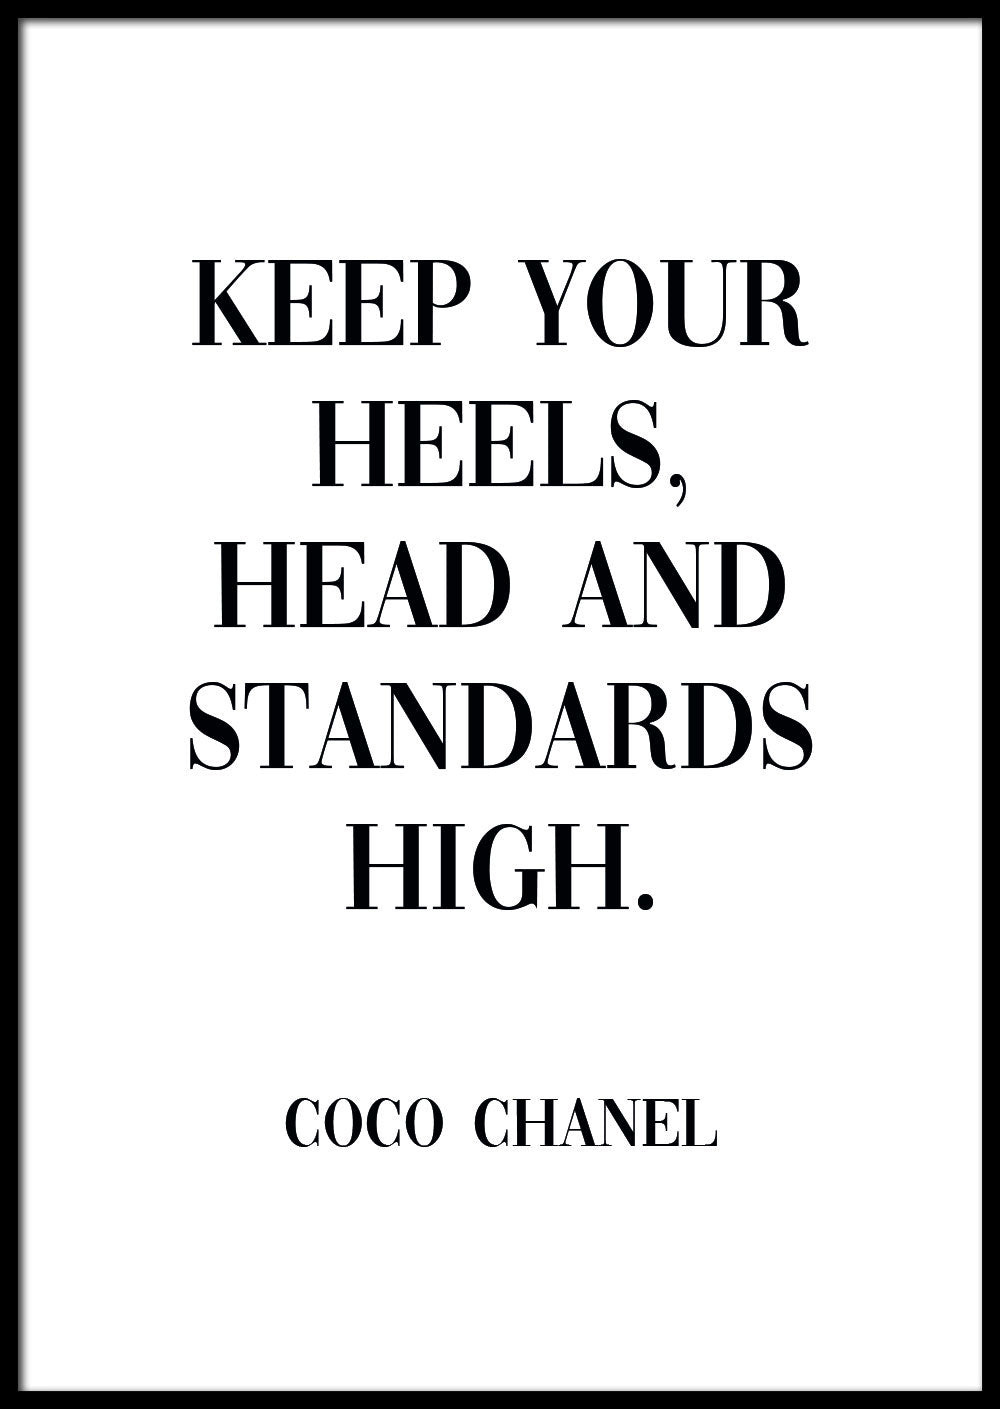 Coco Chanel Citat 💕 – Posters of Tomorrow®